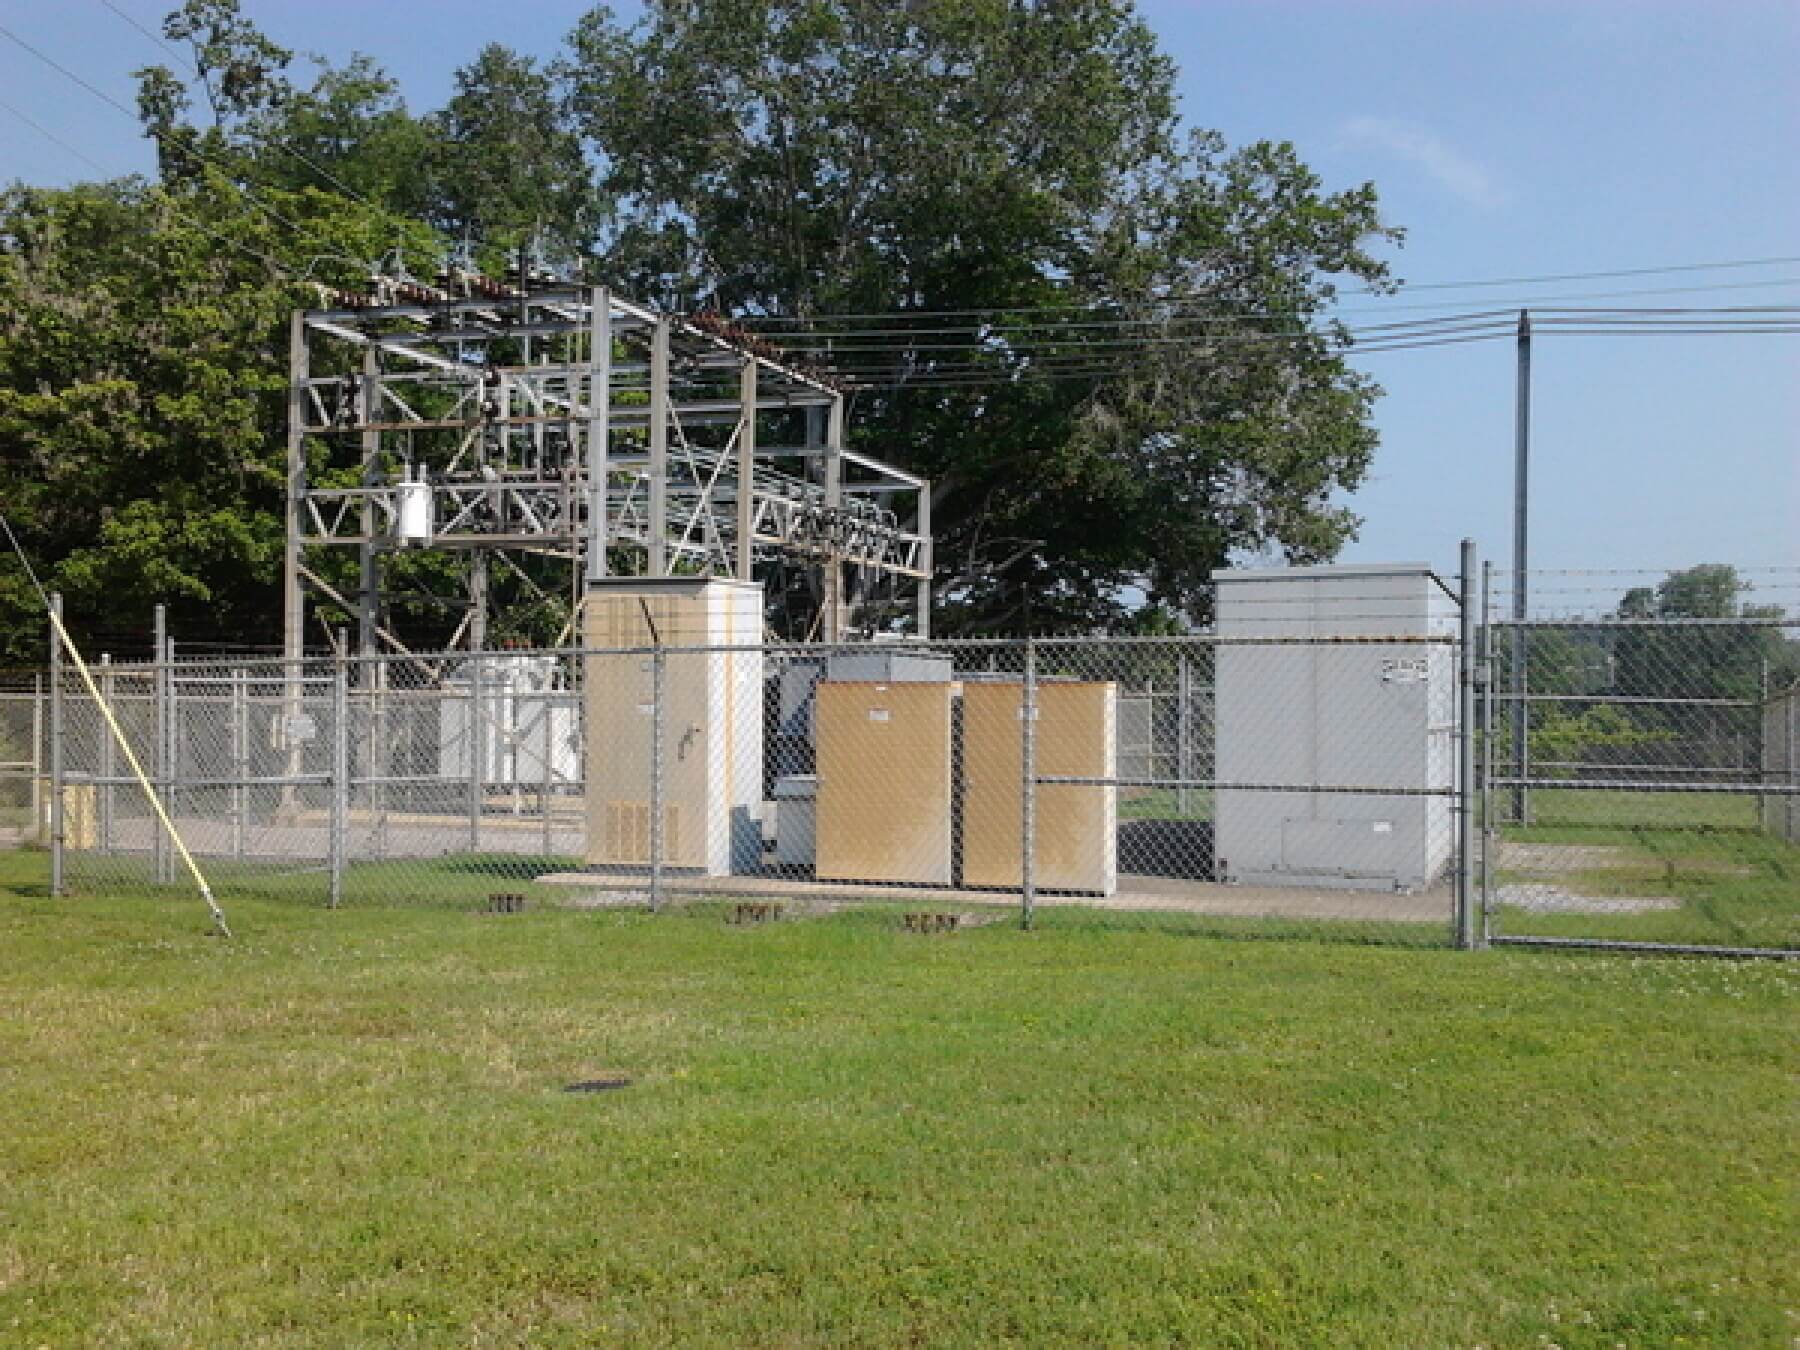 Fenced off area with power generators.